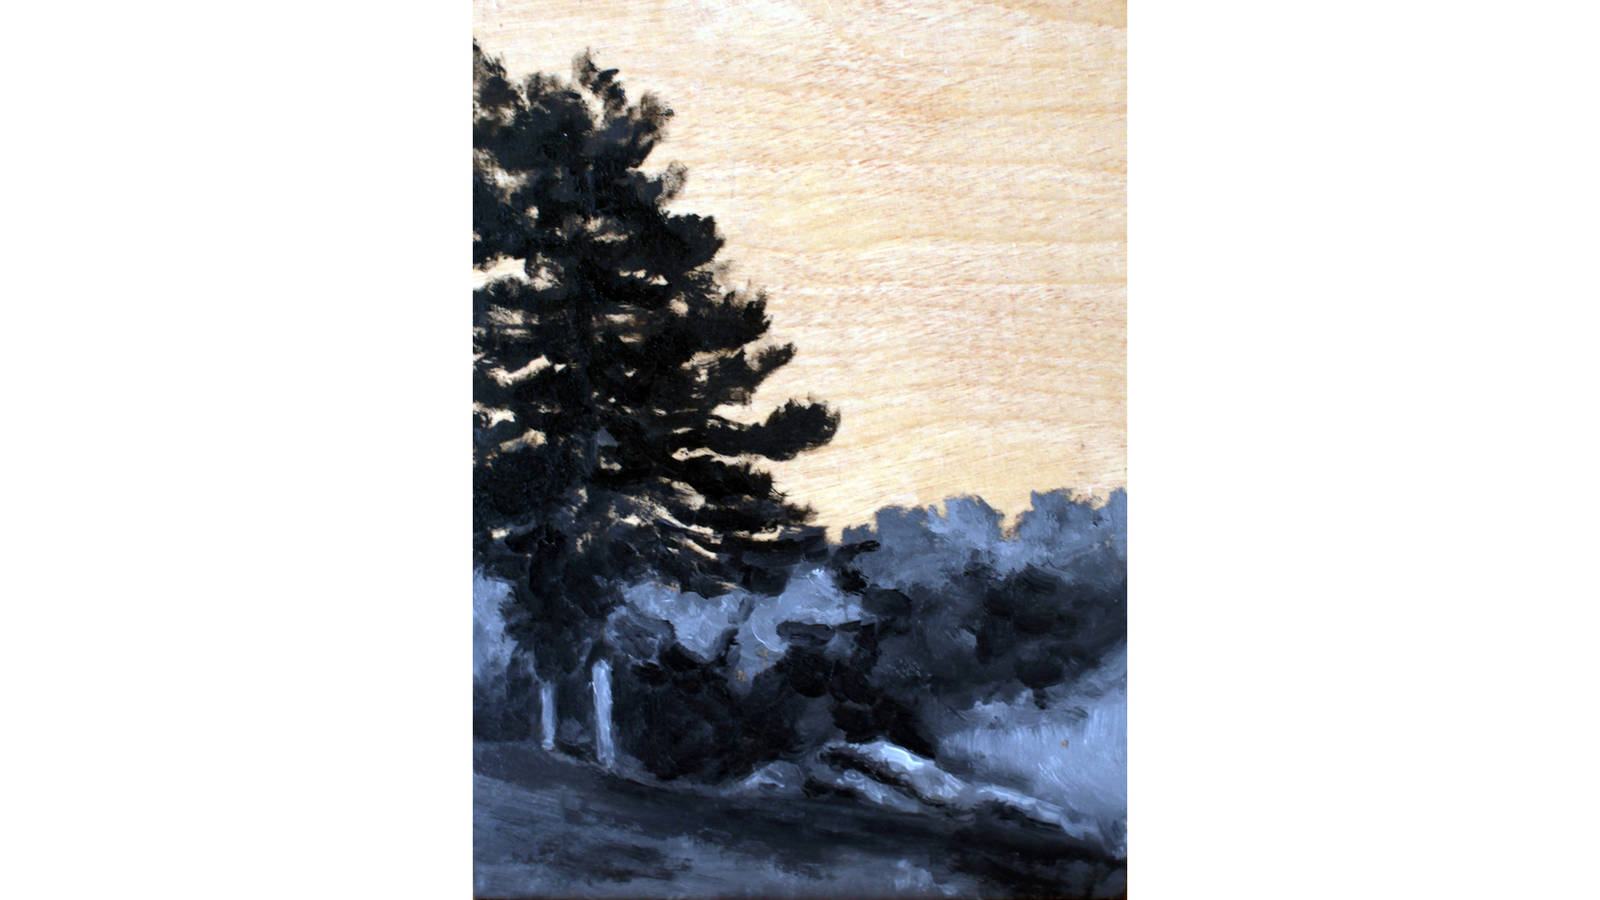 <h3 style="text-align: center; padding: 50px;"><span class="text-Intro-style">Hot Springs National Park, Arkansas. Black and white oil paint on wood, 2016.</span></h3>